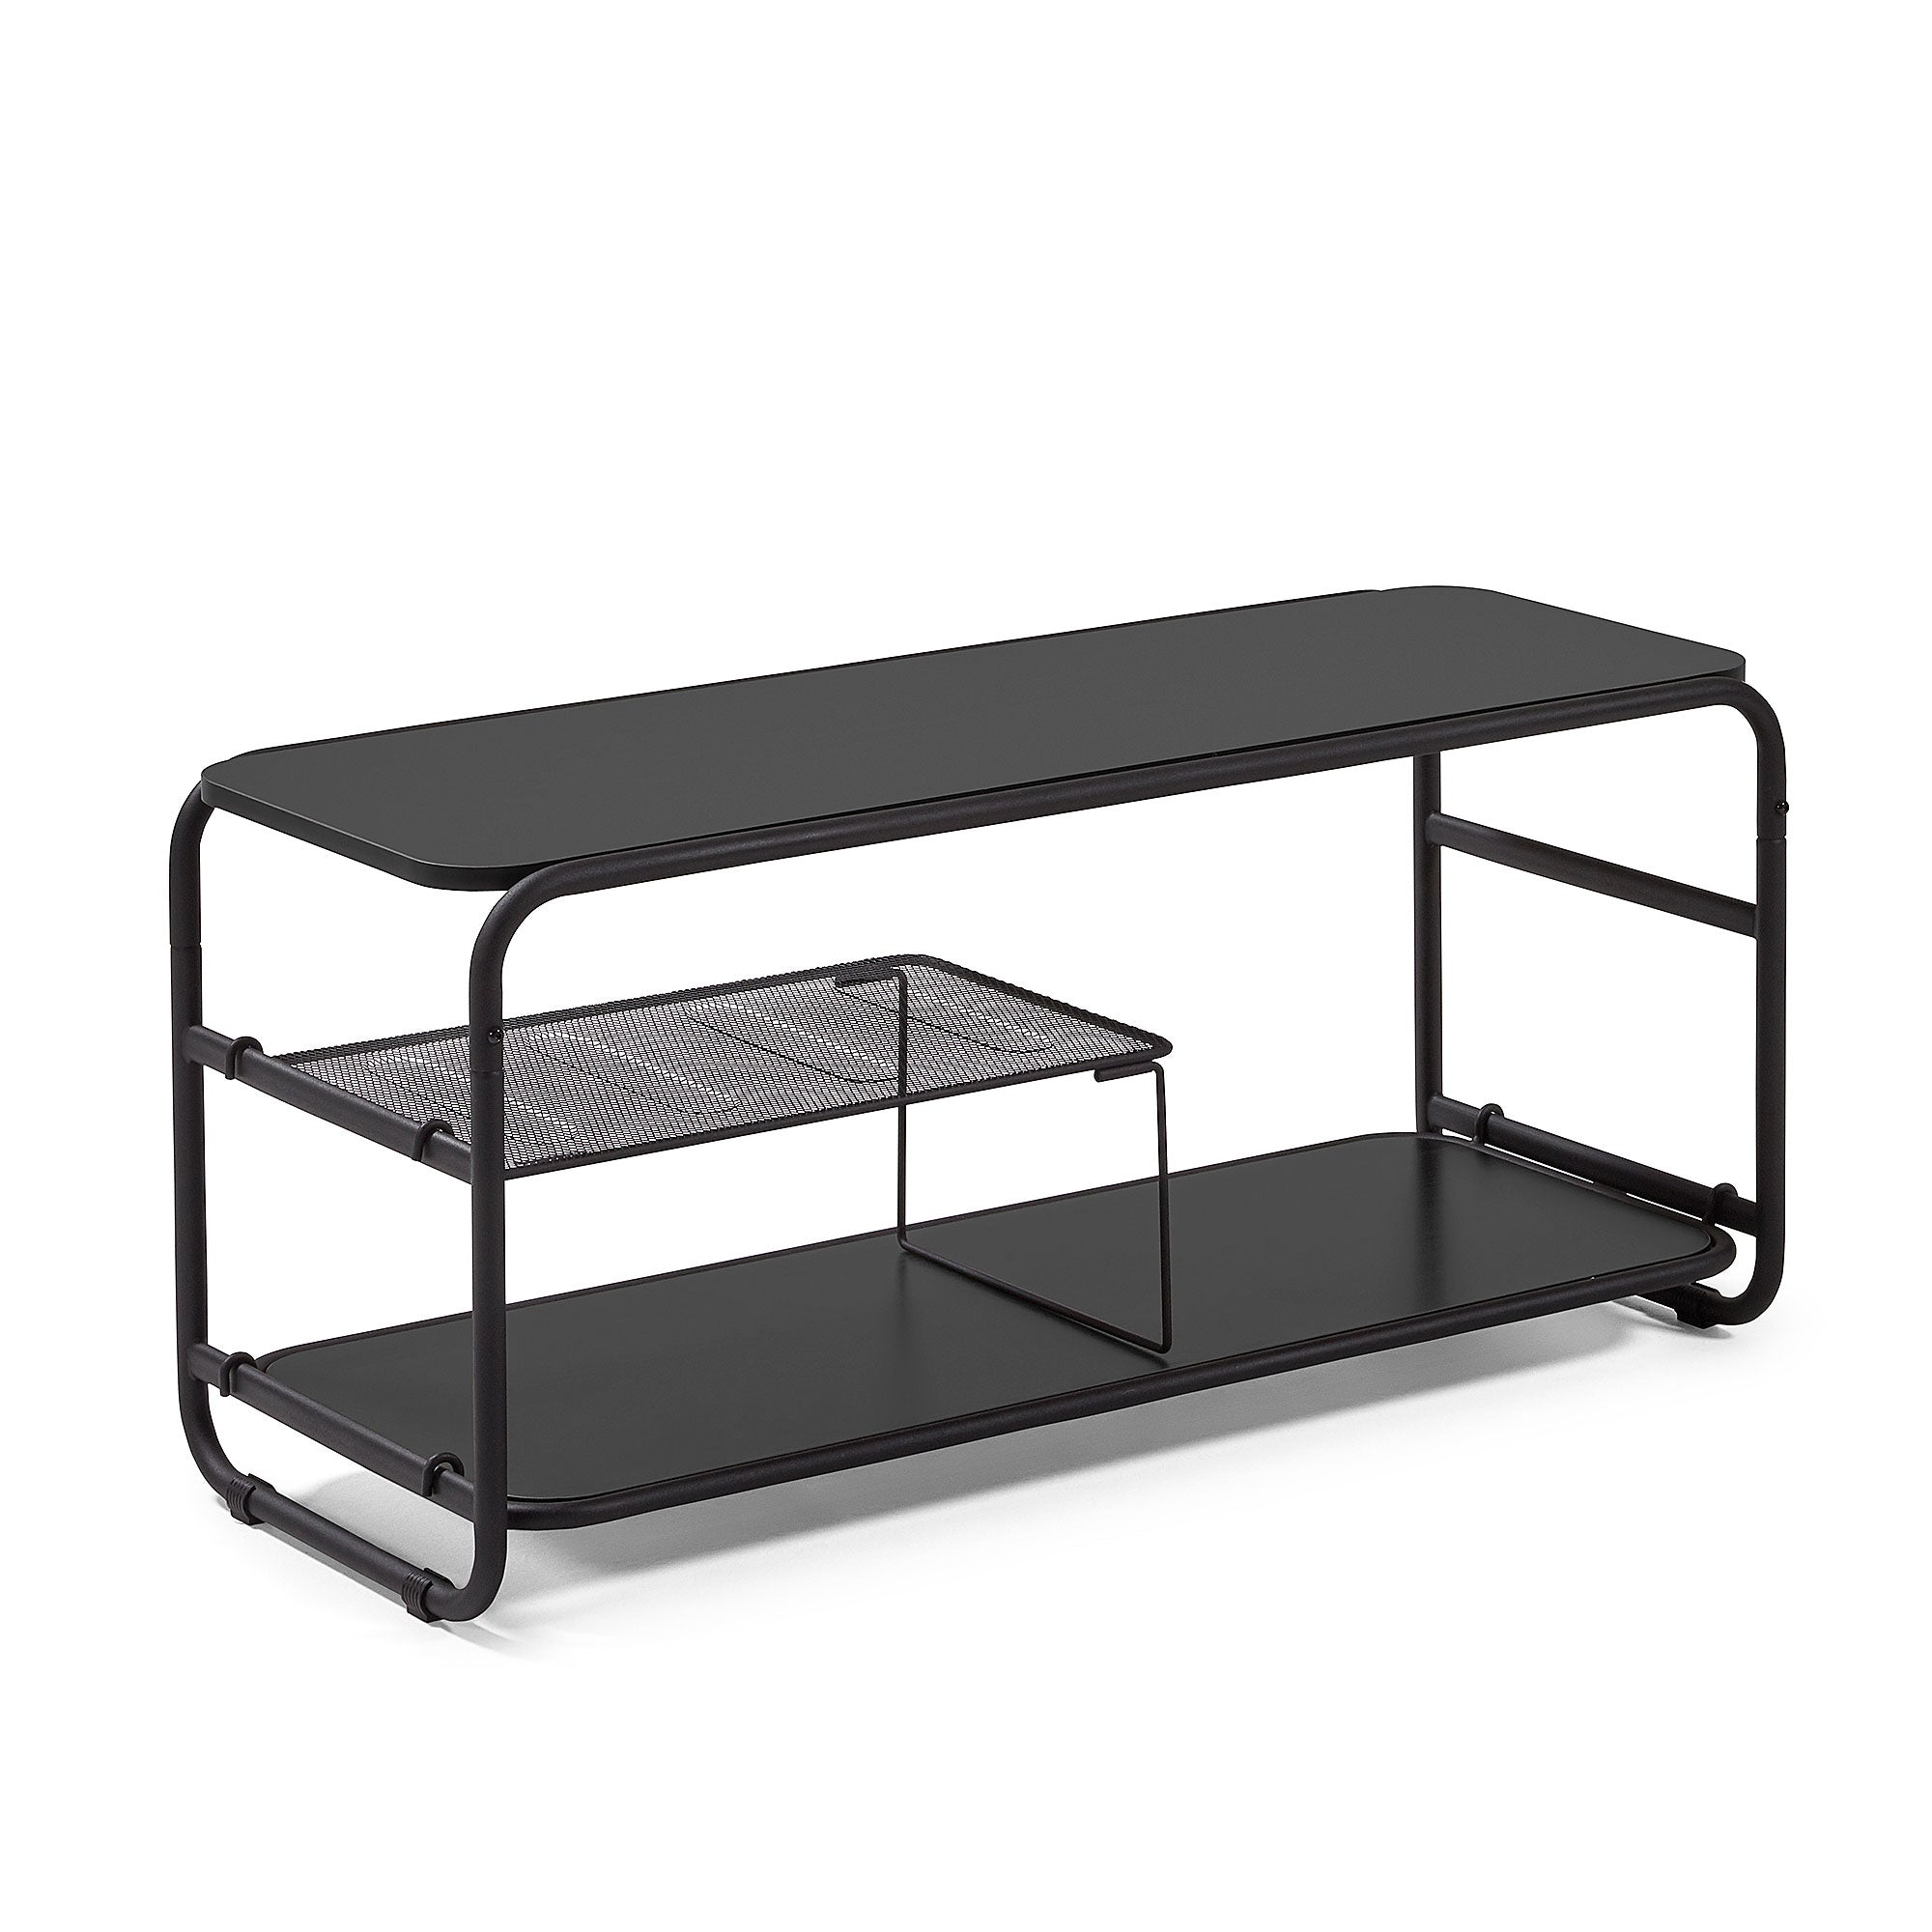 Academy melamine and black finish steel TV stand, 98 x 46 cm